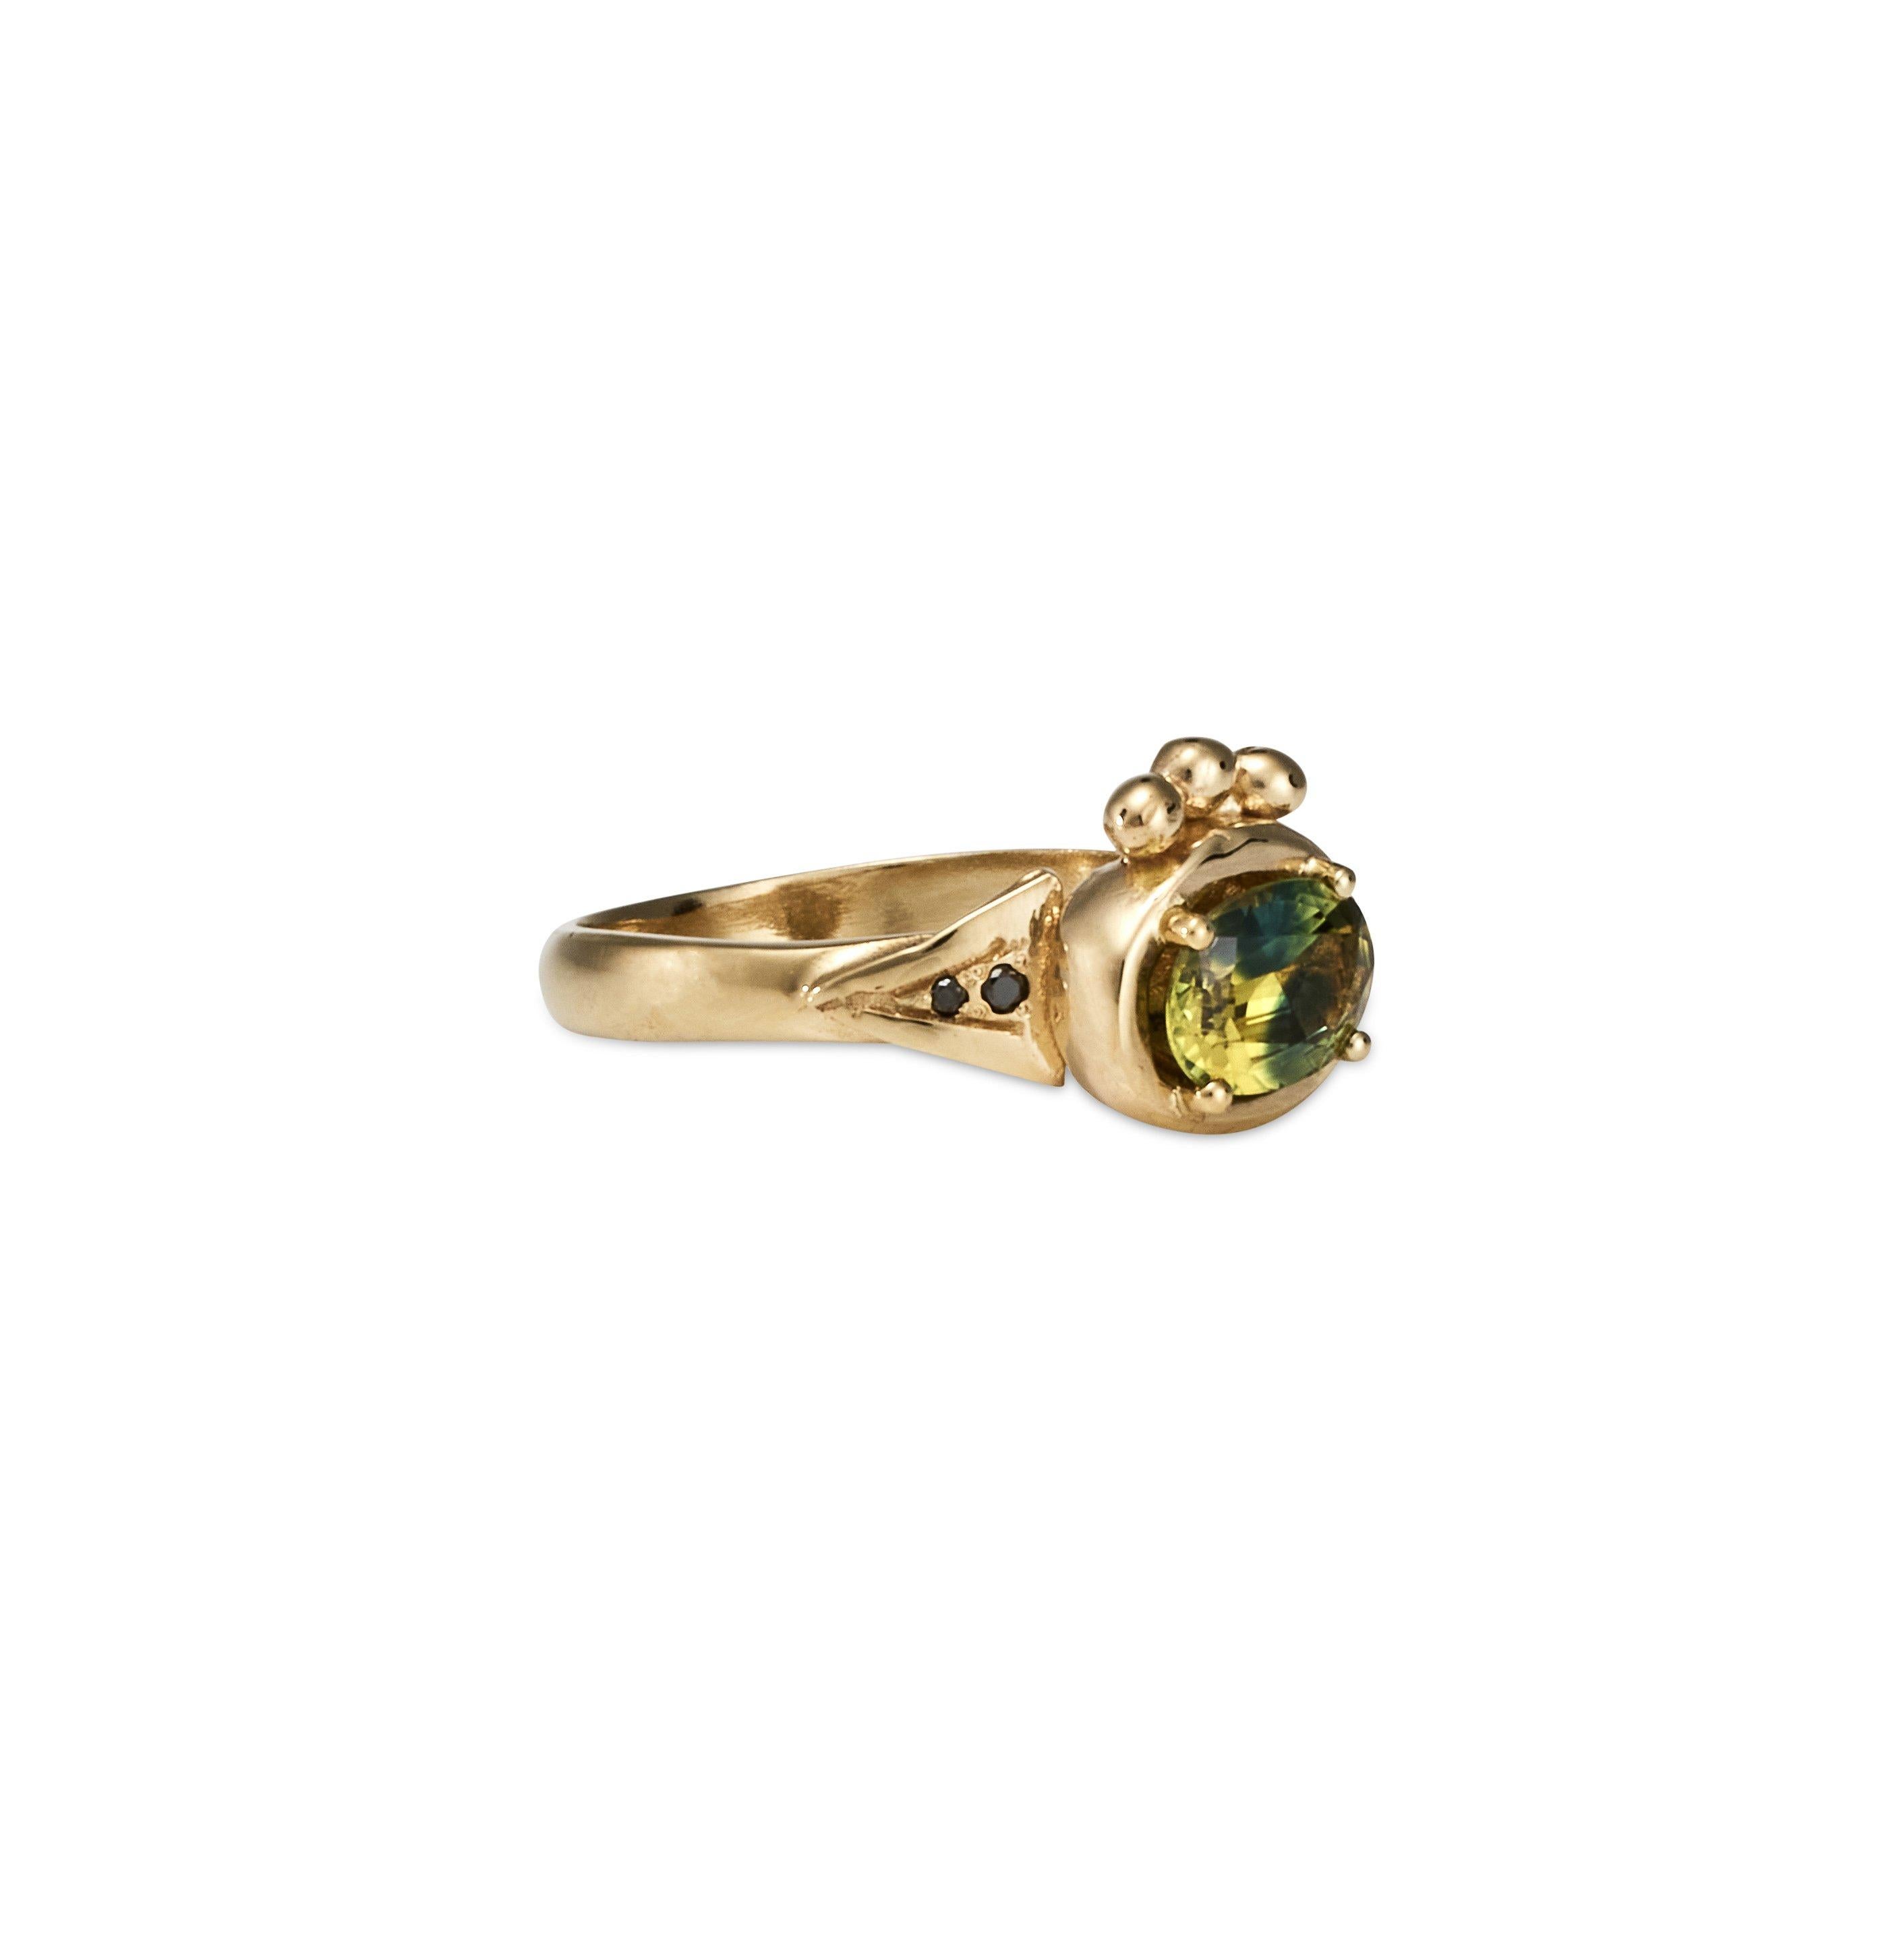 Marica Ring, 14 Karat Yellow Gold with Australian Parti Sapphire and Black Diamond
Handcrafted and individually cast in solid gold. Olivia carves each piece from wax, making these items unique, which we believe is what gives them their beauty. The